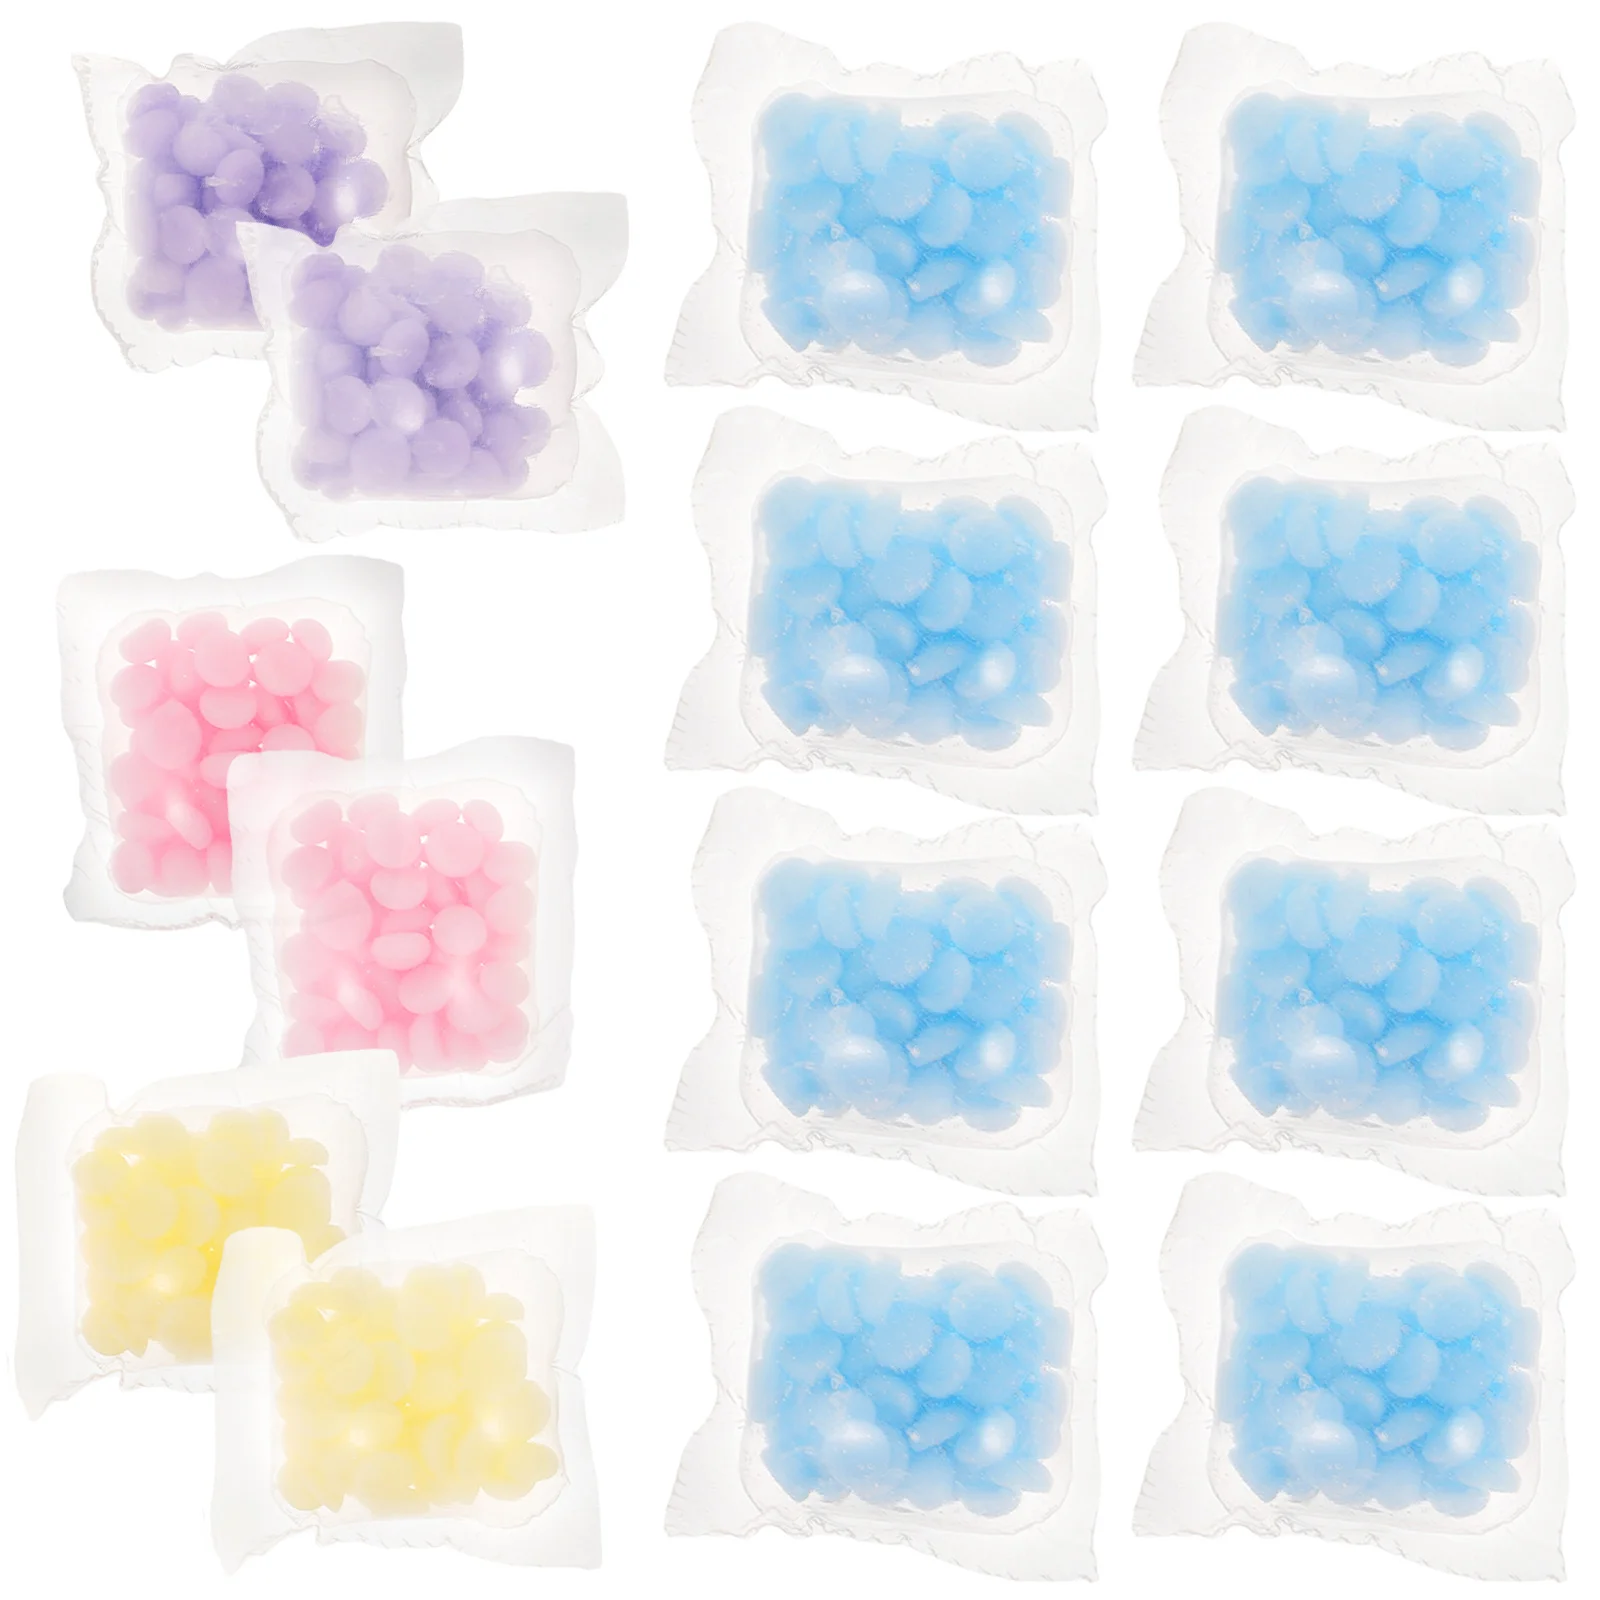 

50 Pcs Fragrance Condensate Beads Concentrated Laundry Cleaning Tools Washing Clothes Balls Household Powder Softener Fiber